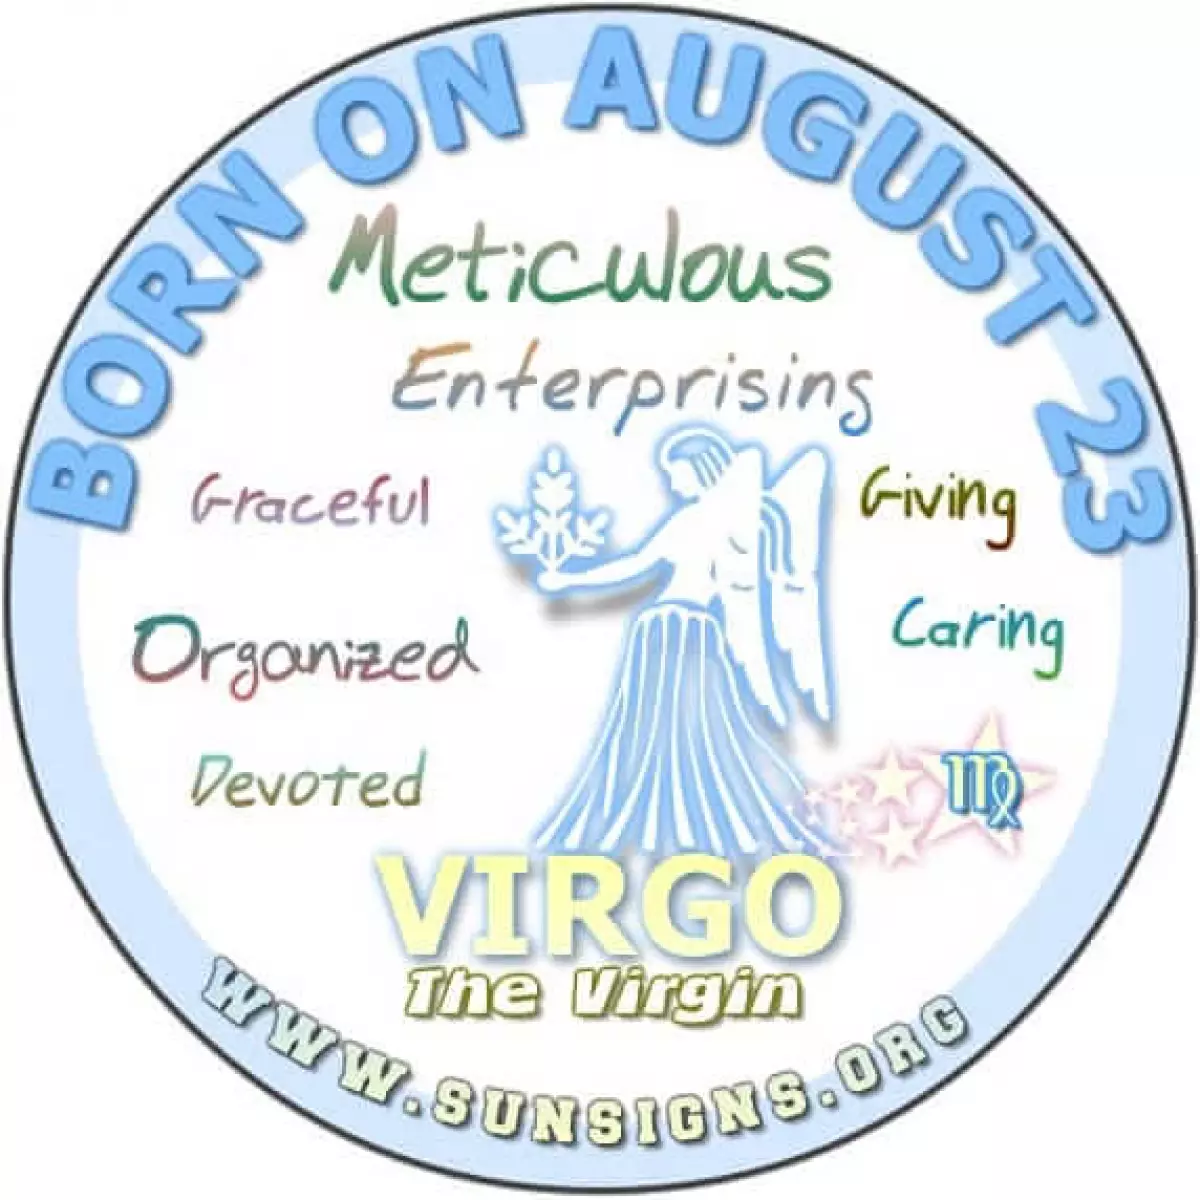 IF YOUR BIRTHDAY IS AUGUST 23, you are born under the Virgo zodiac sign.